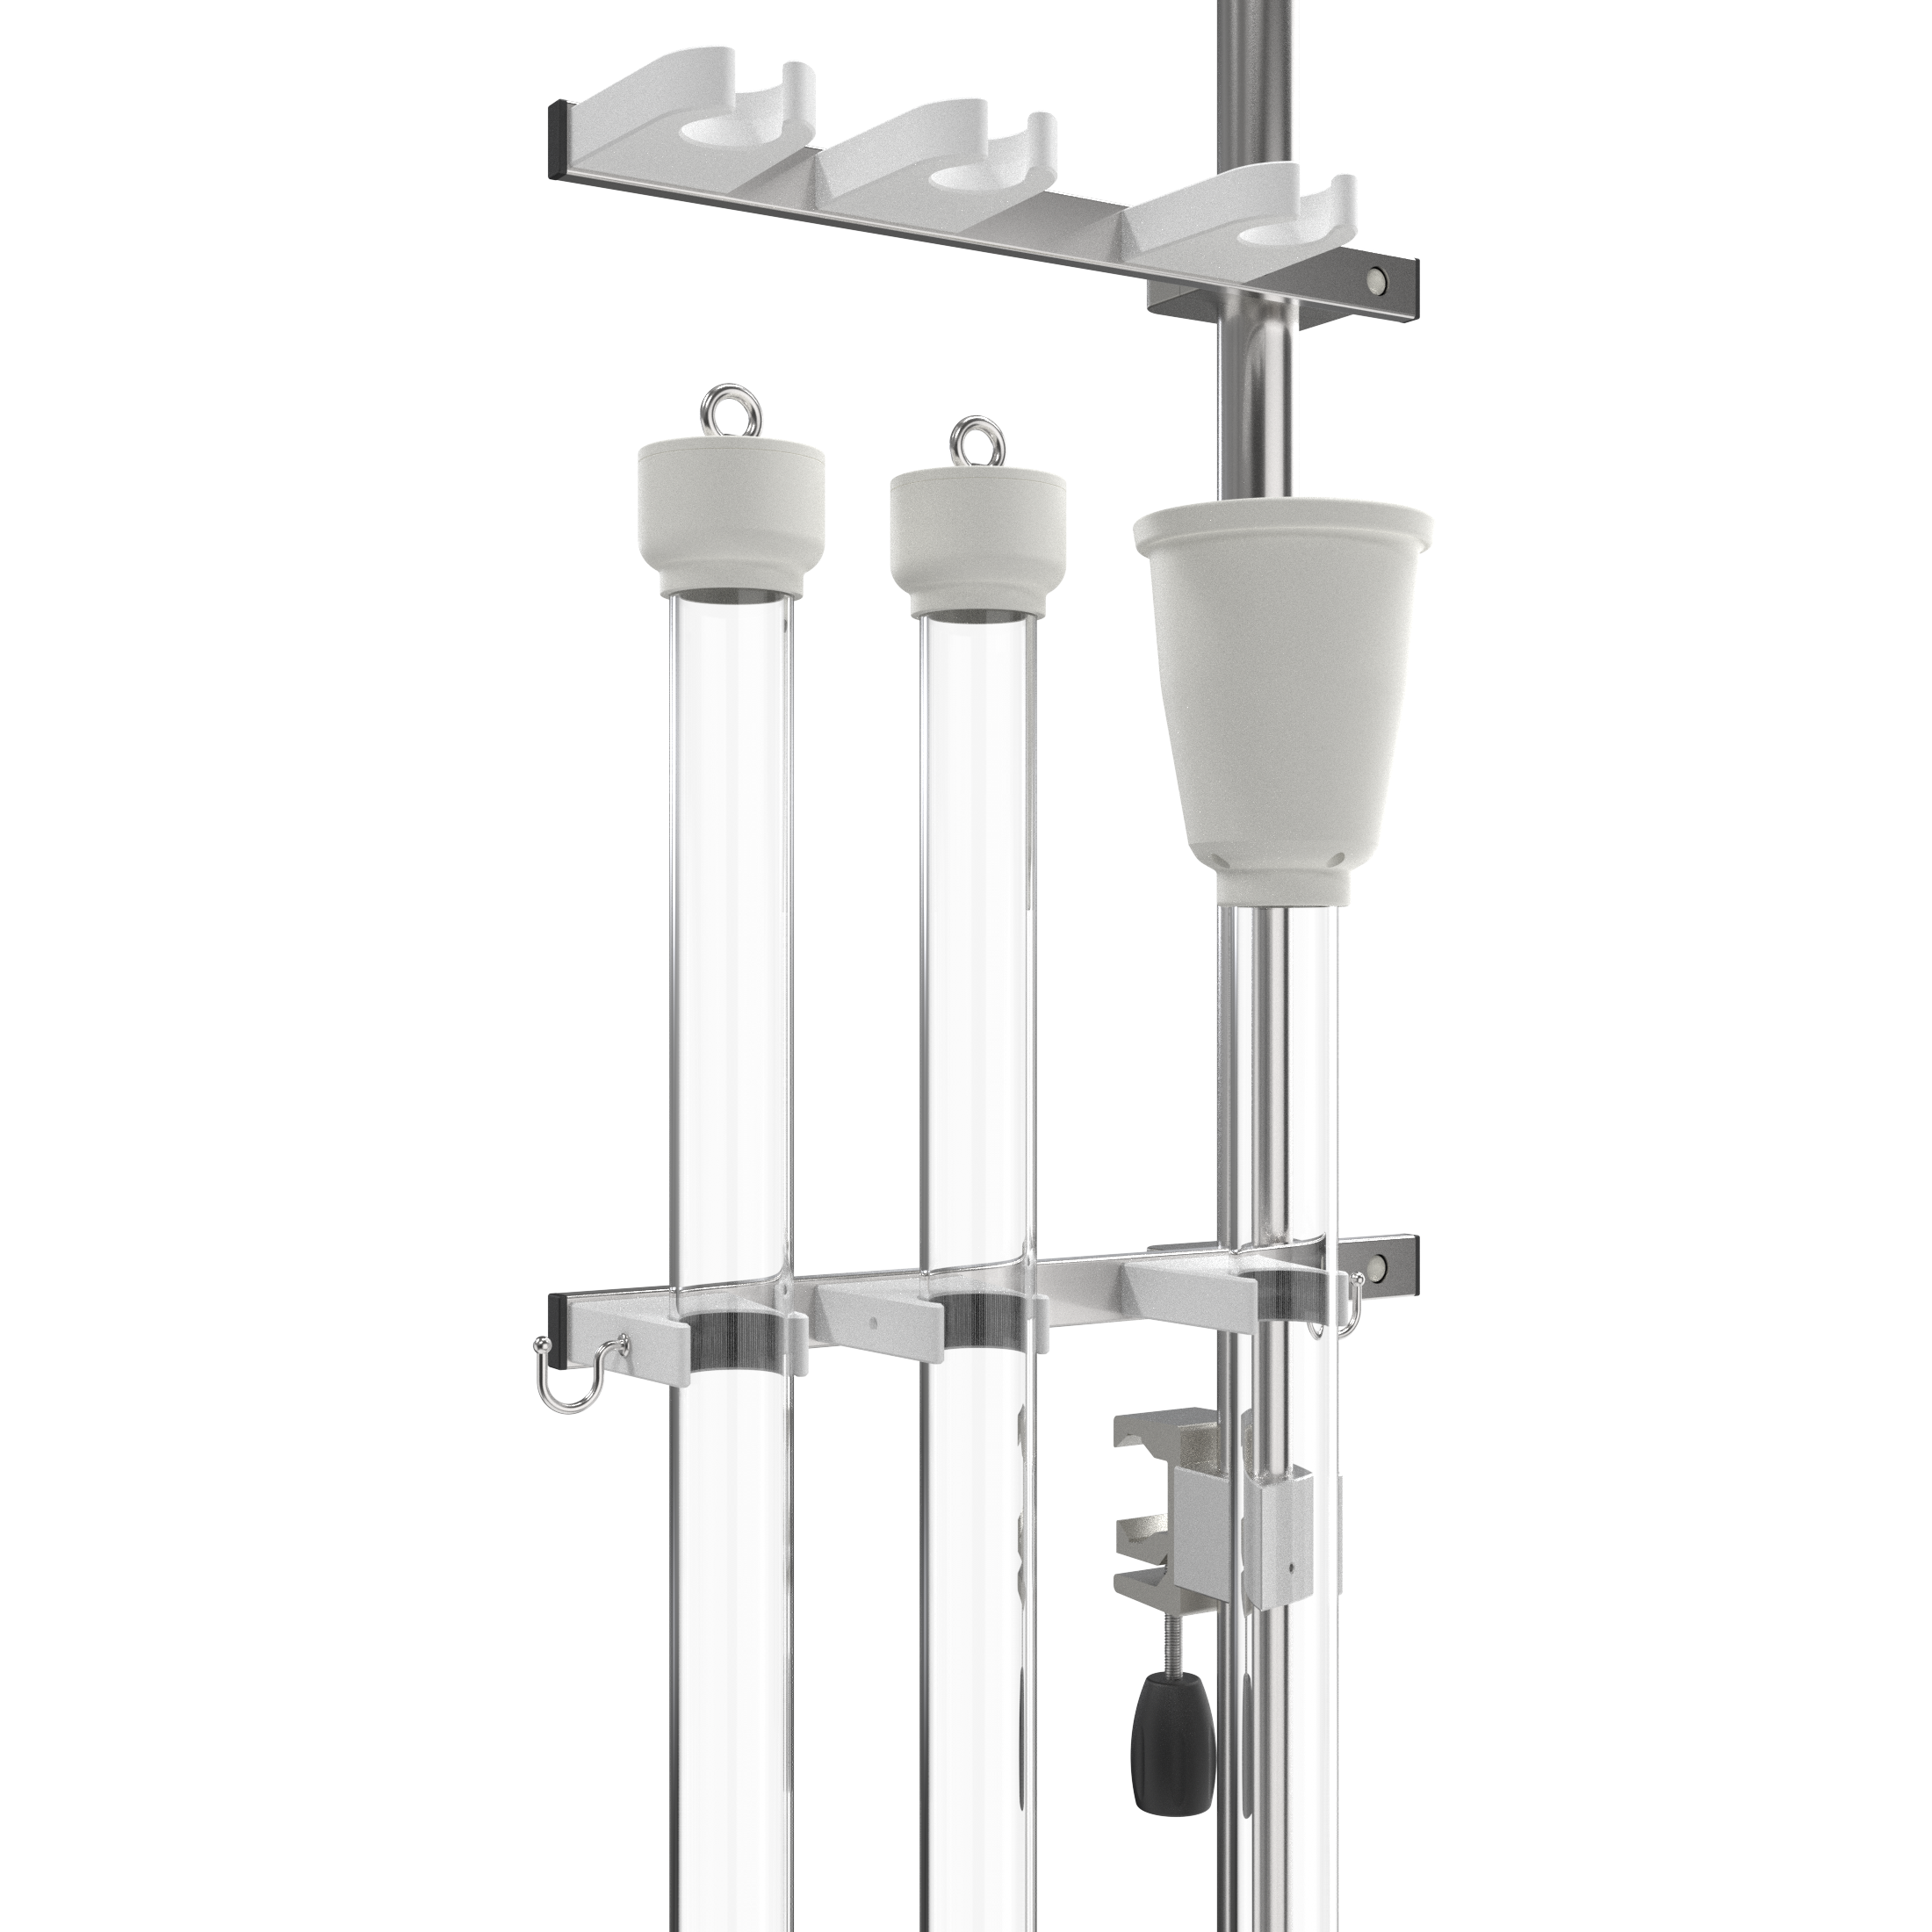 Round tube for wall rails, with 3 tubes